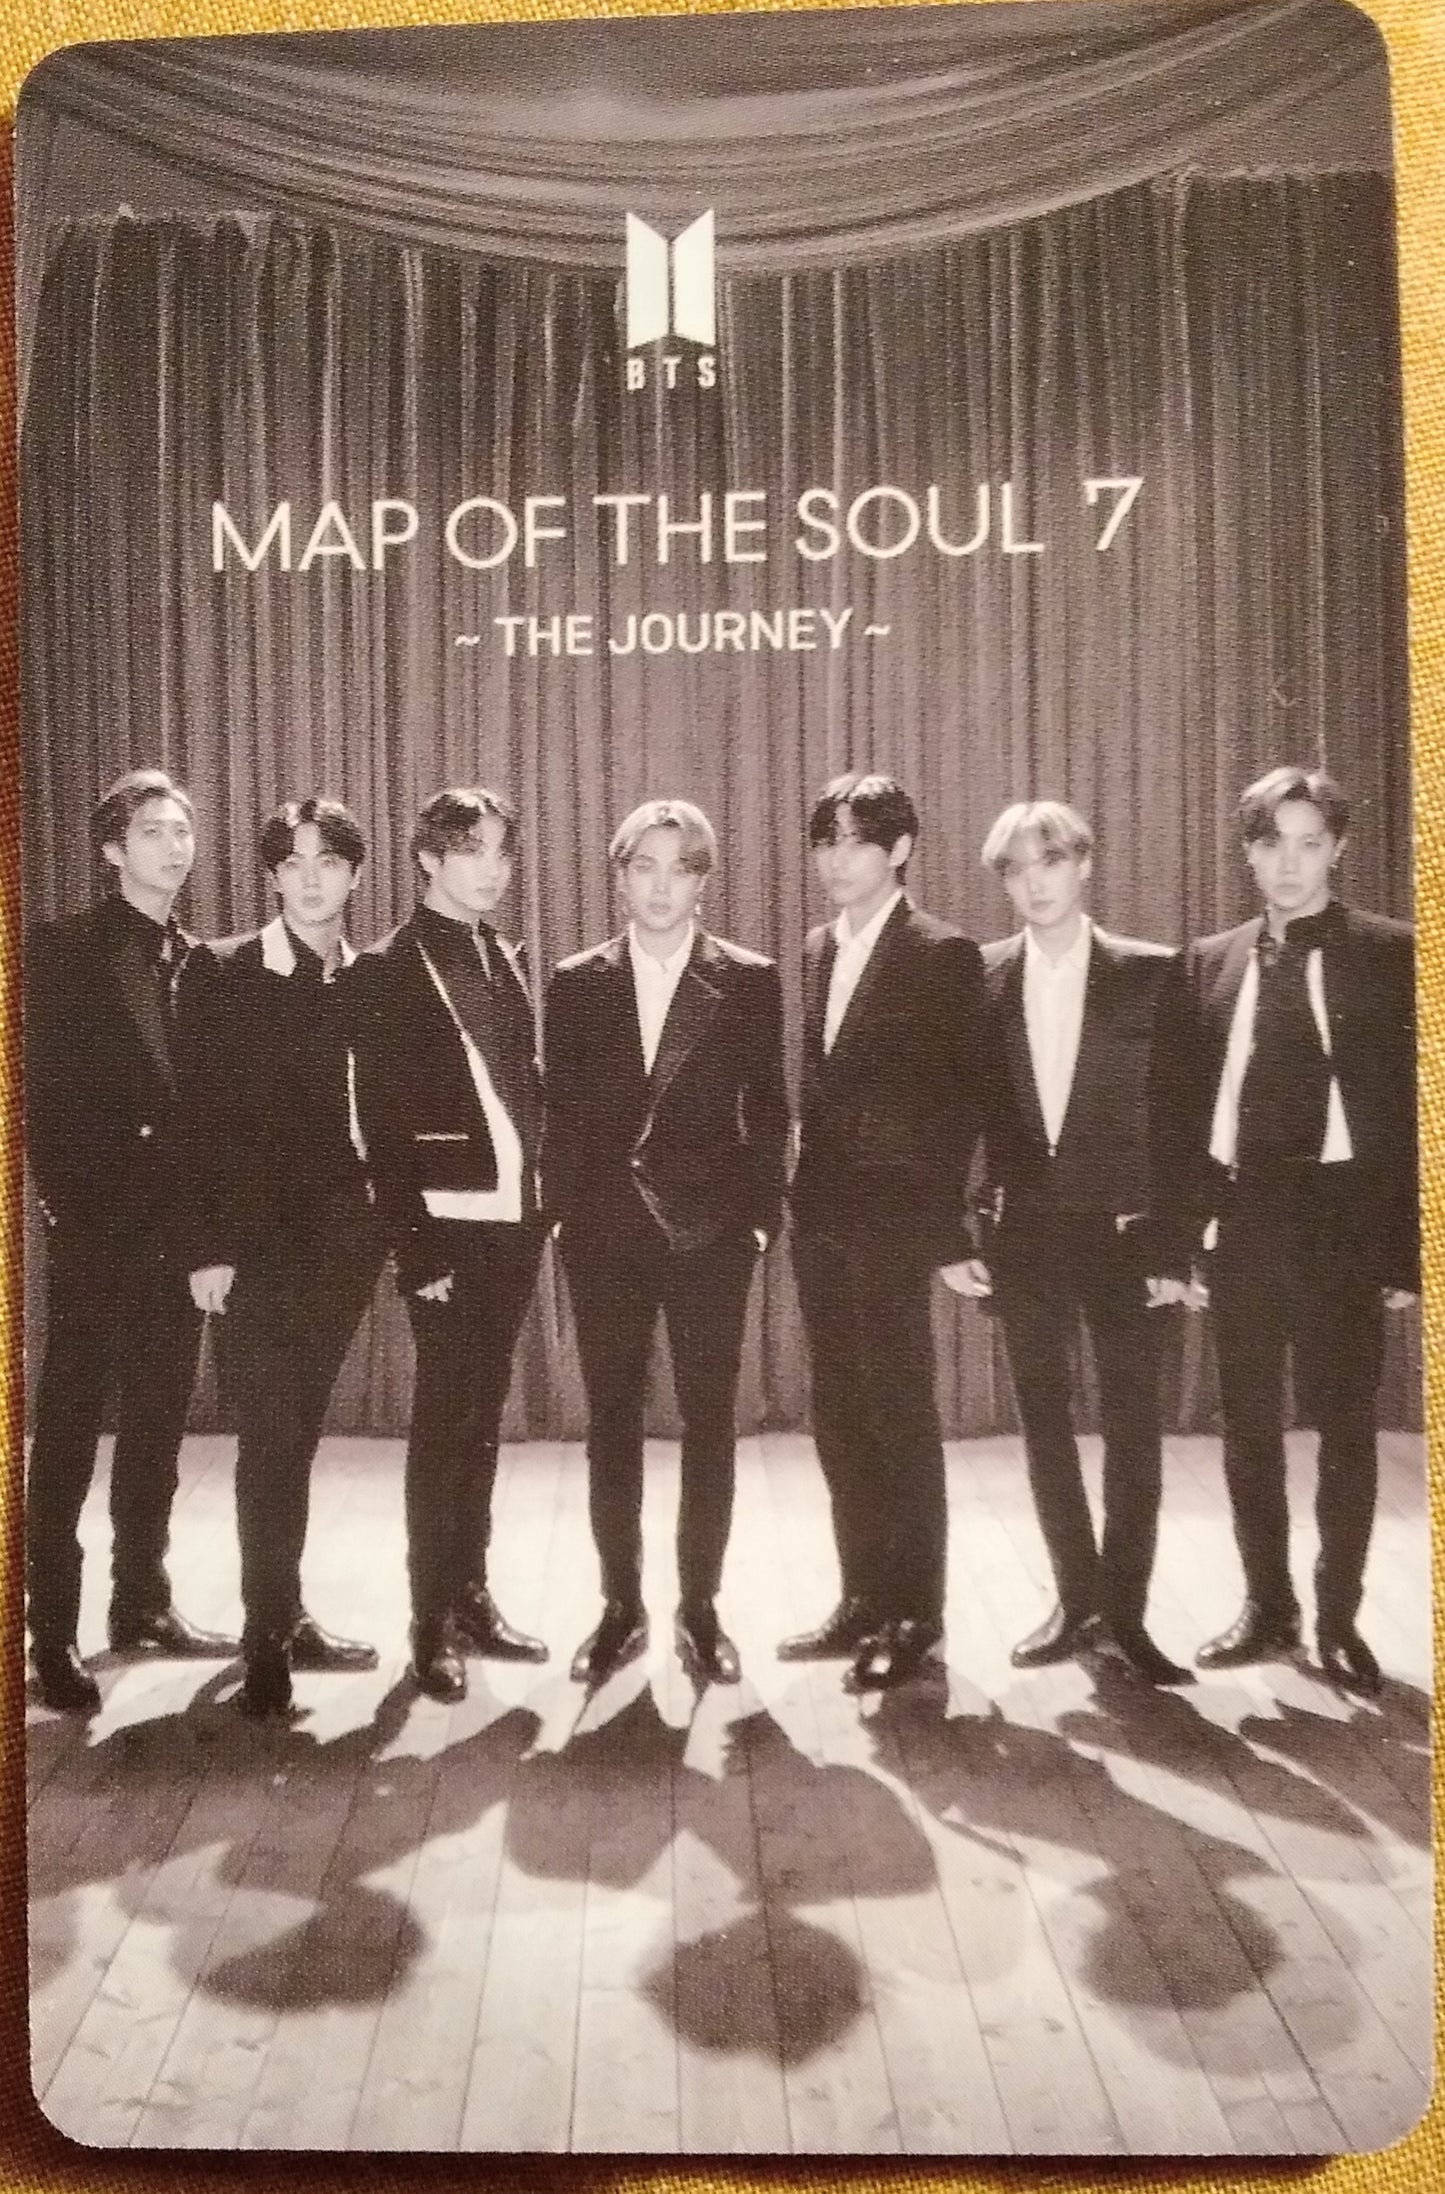 Photocard  BTS  Map of the soul 7  "The journey"